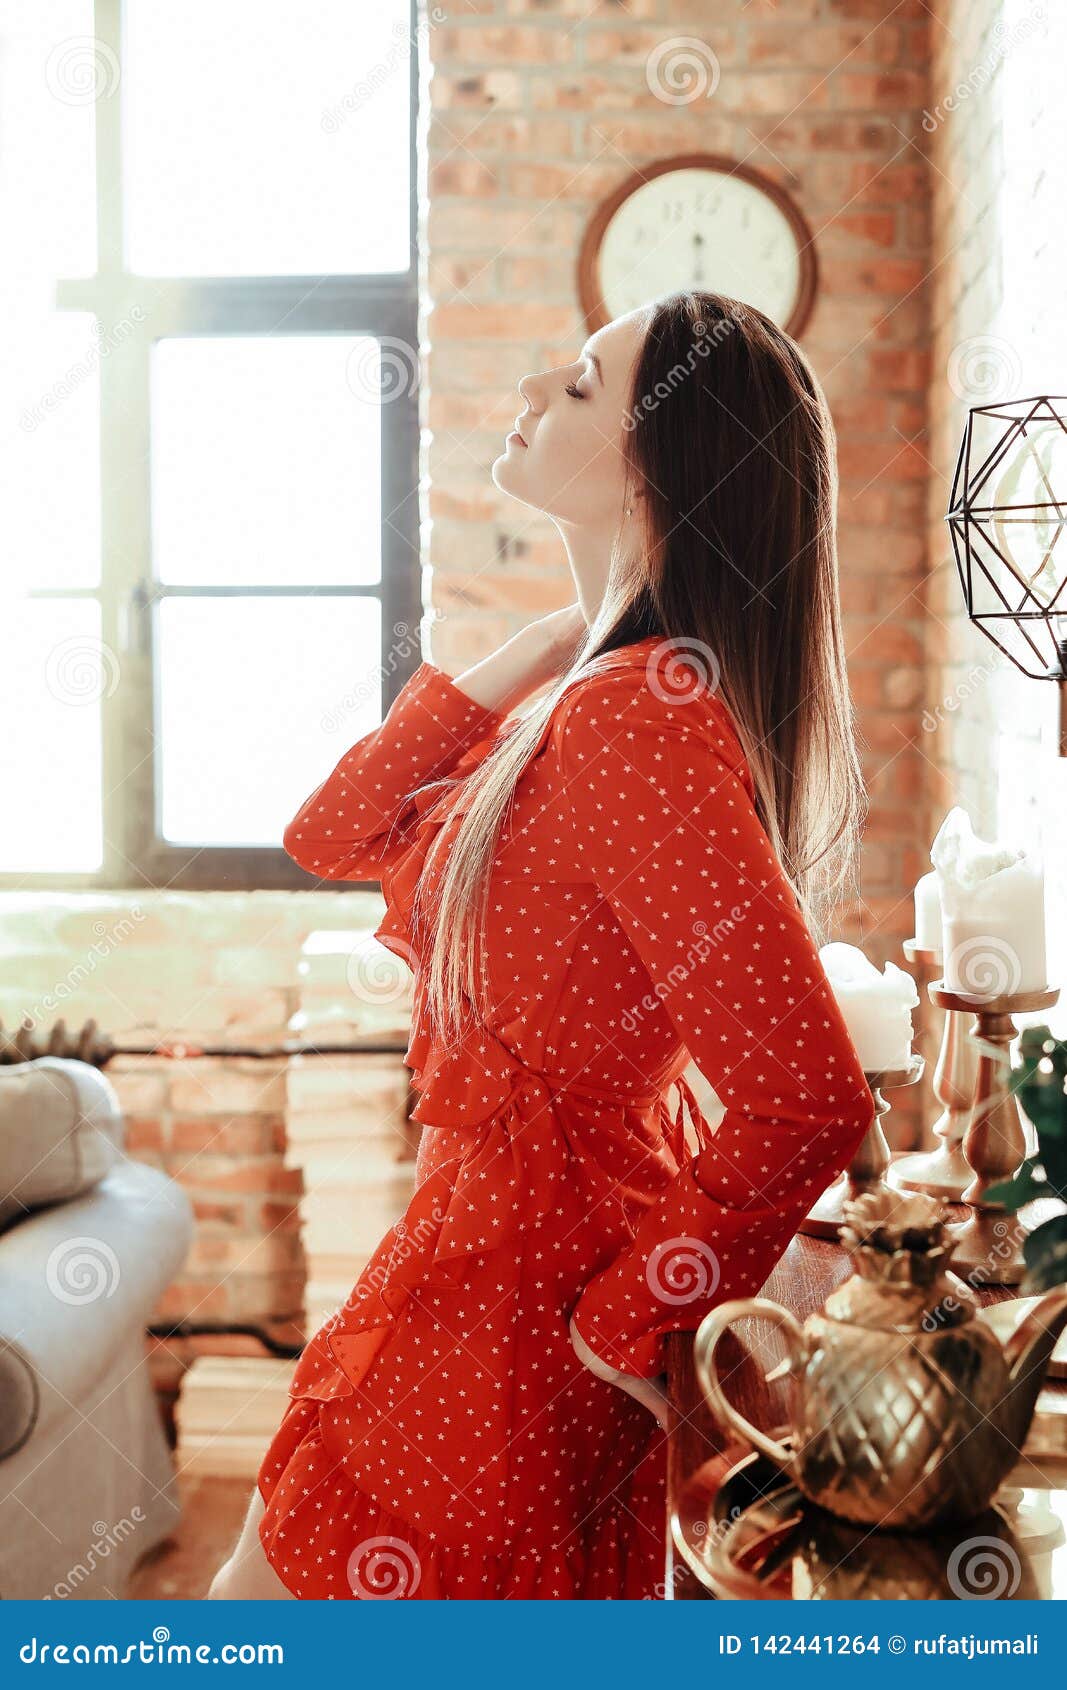 Girl in red dress stock photo. Image of leisure, plant - 142441264